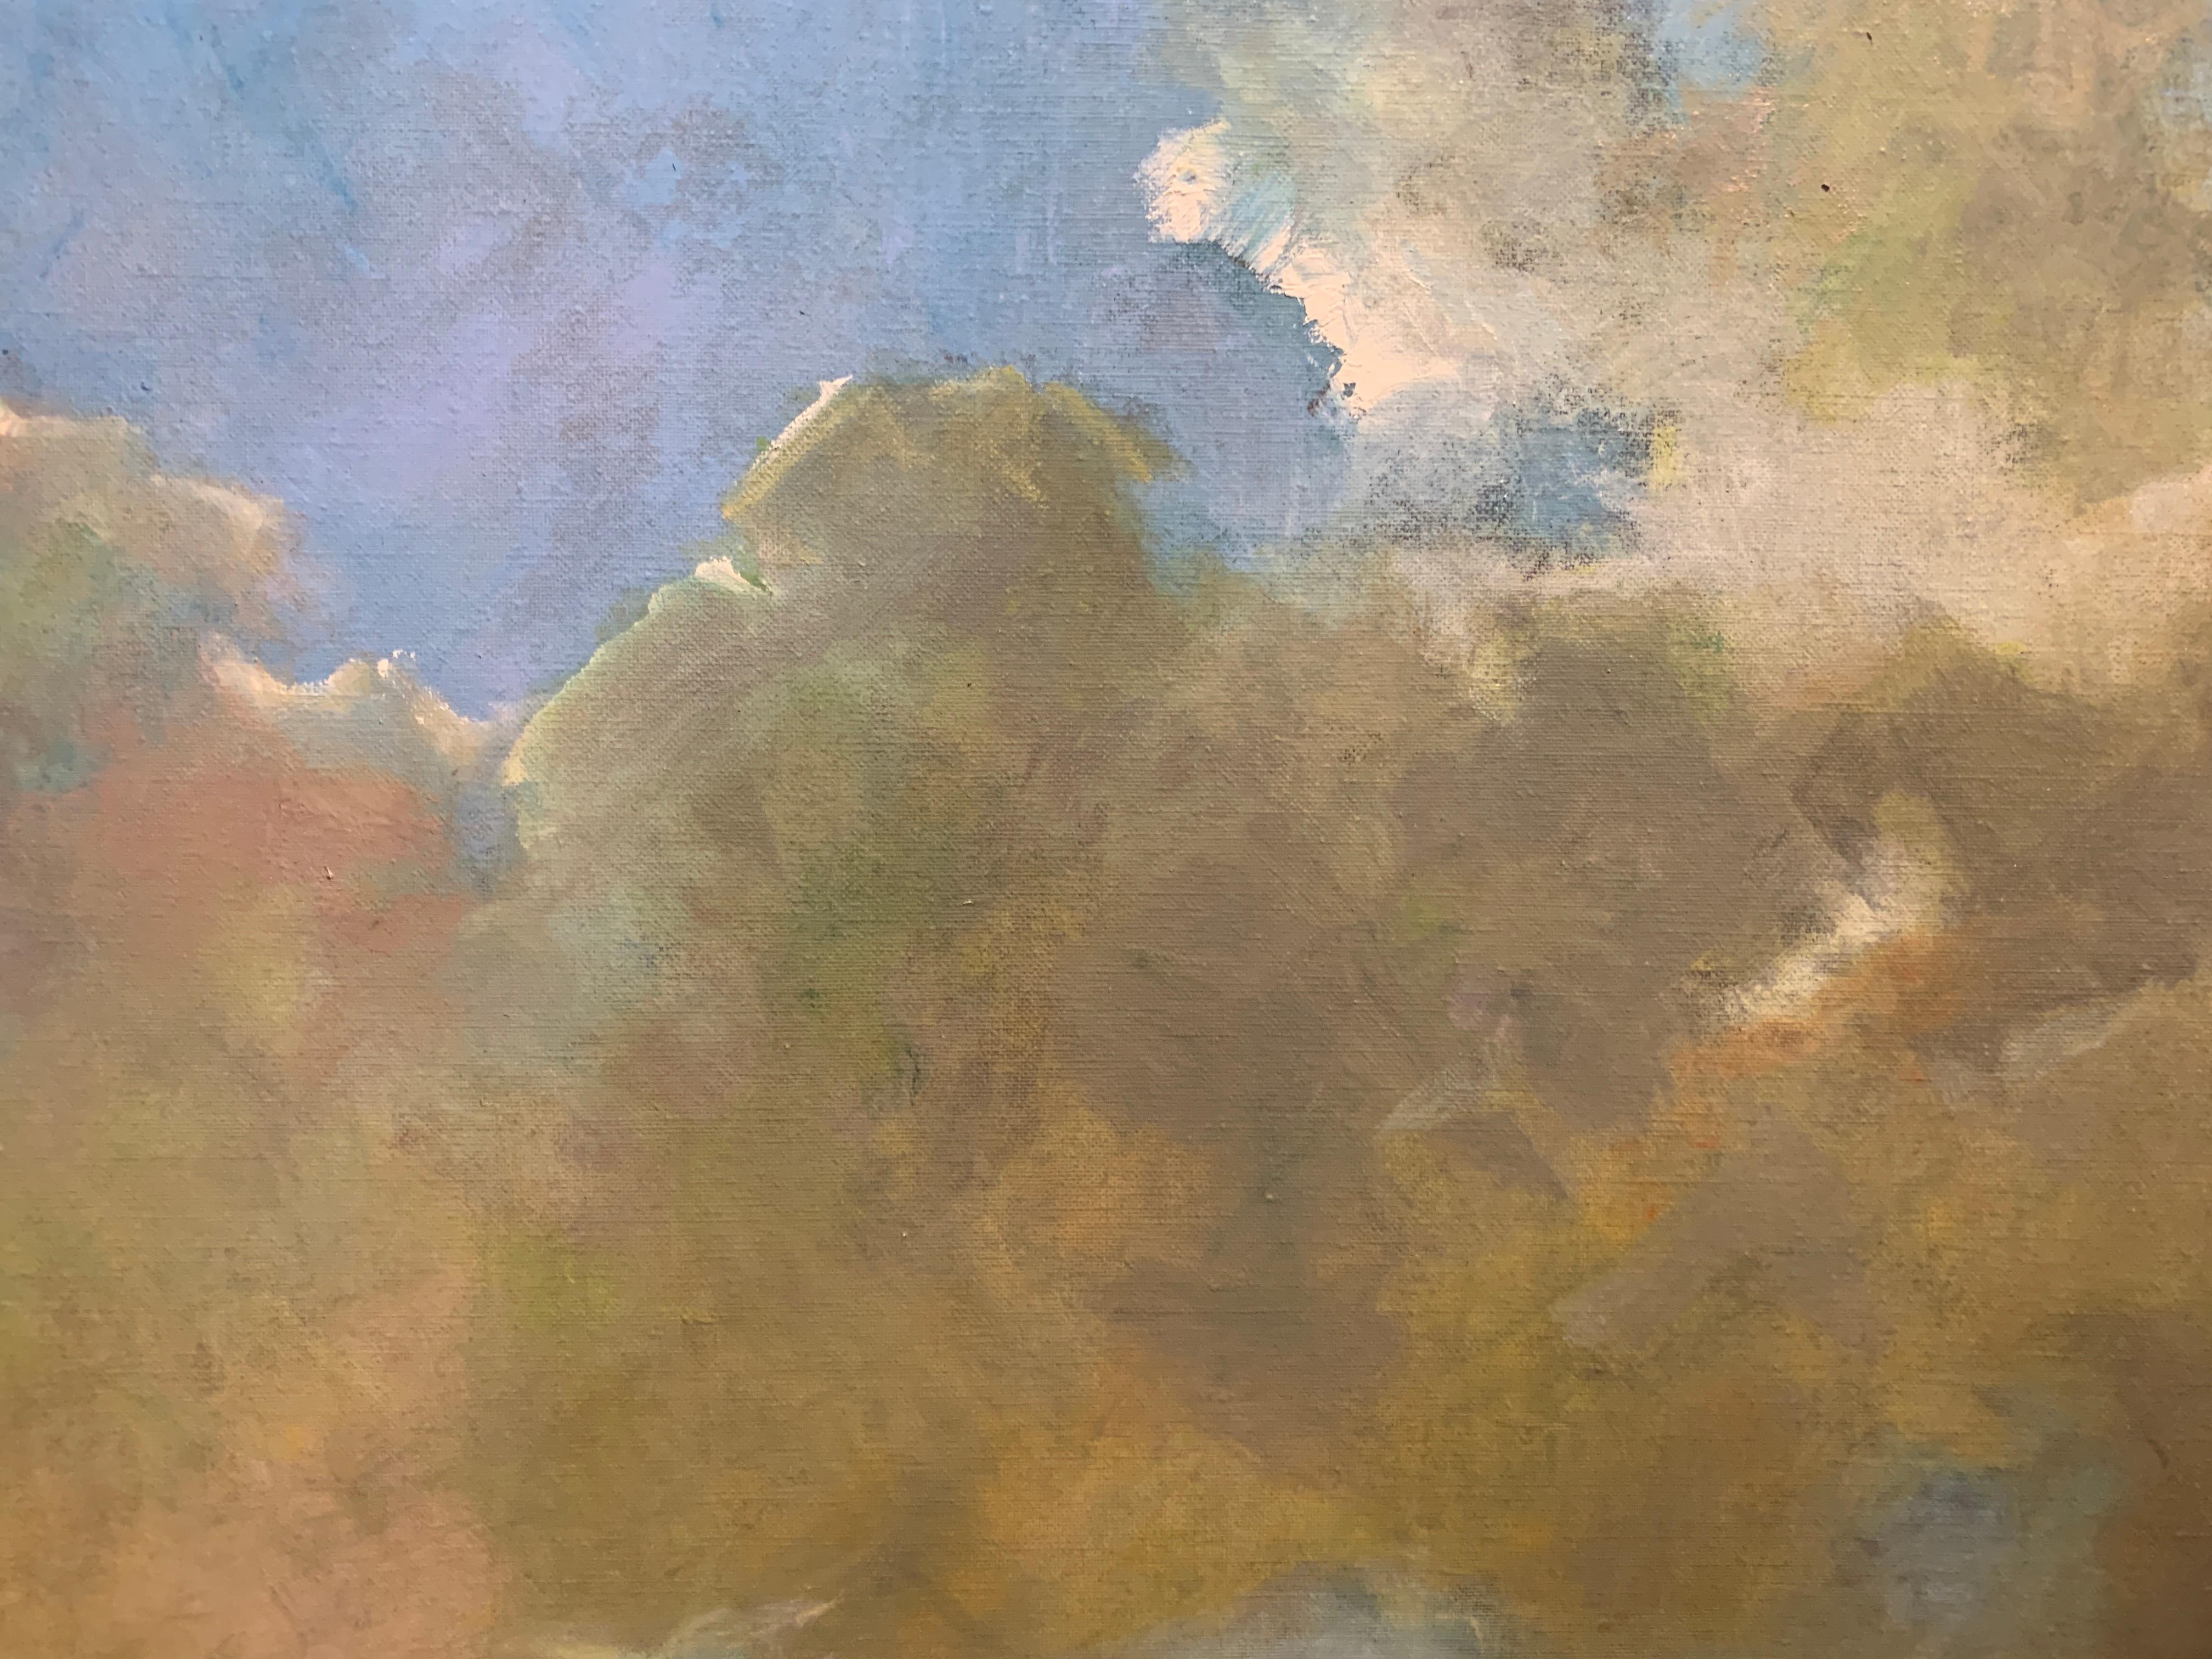 'Eventide' is a Post-Impressionist oil on linen landscape painting of horizontal format created by American artist Julie Houck in 2019. Featuring a rich palette mostly made of blue, pink, brown and golden tones, the painting is a serene depiction of